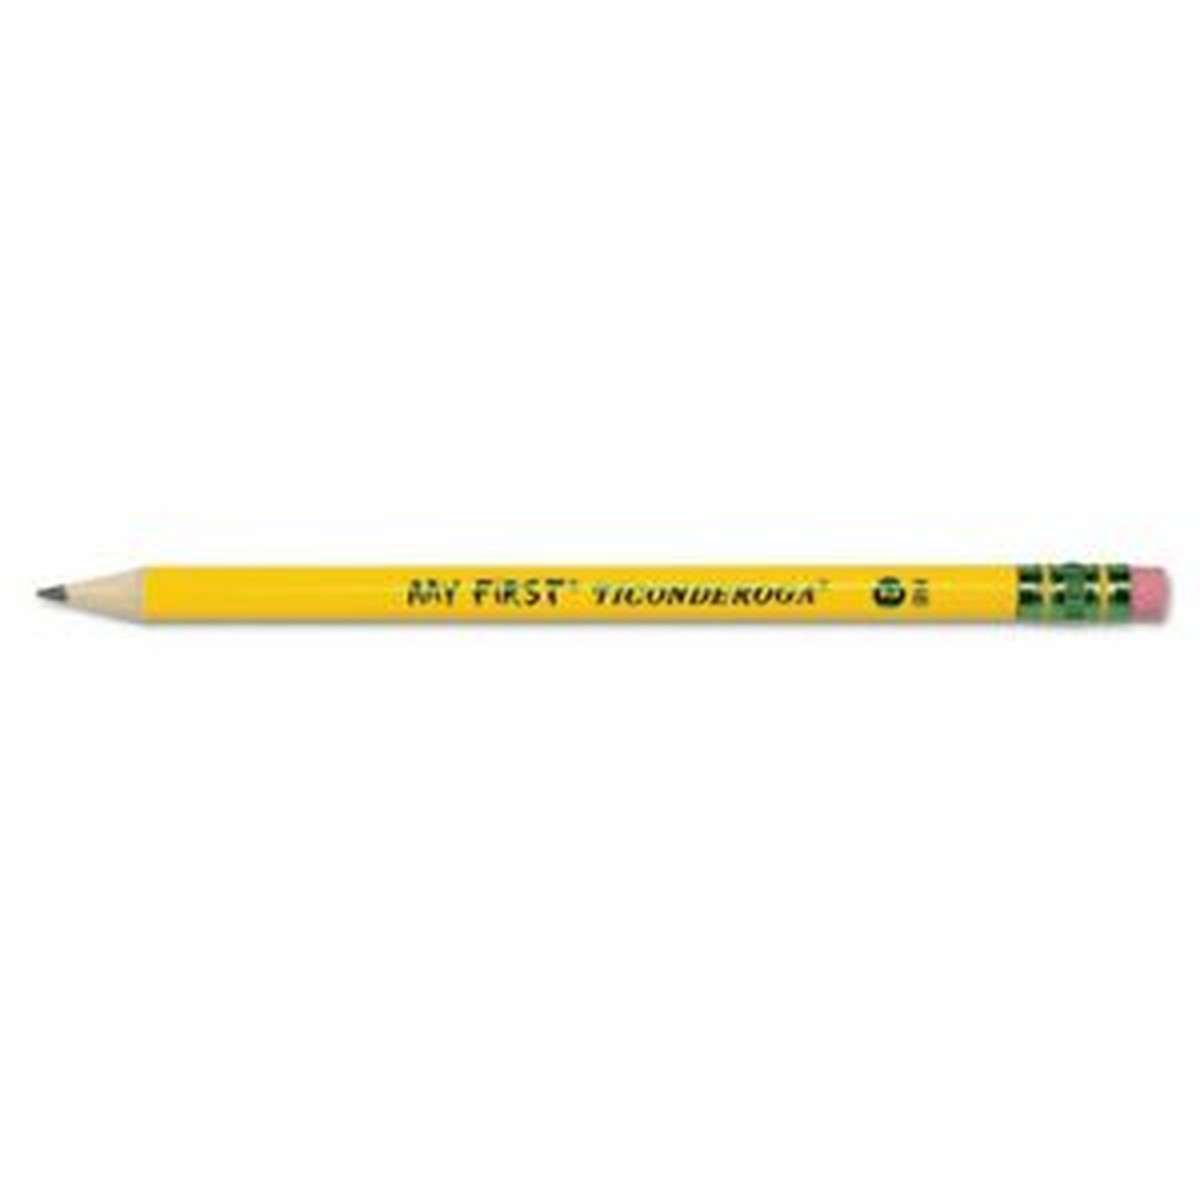 My First Ticonderoga Pencil, Pack of 12